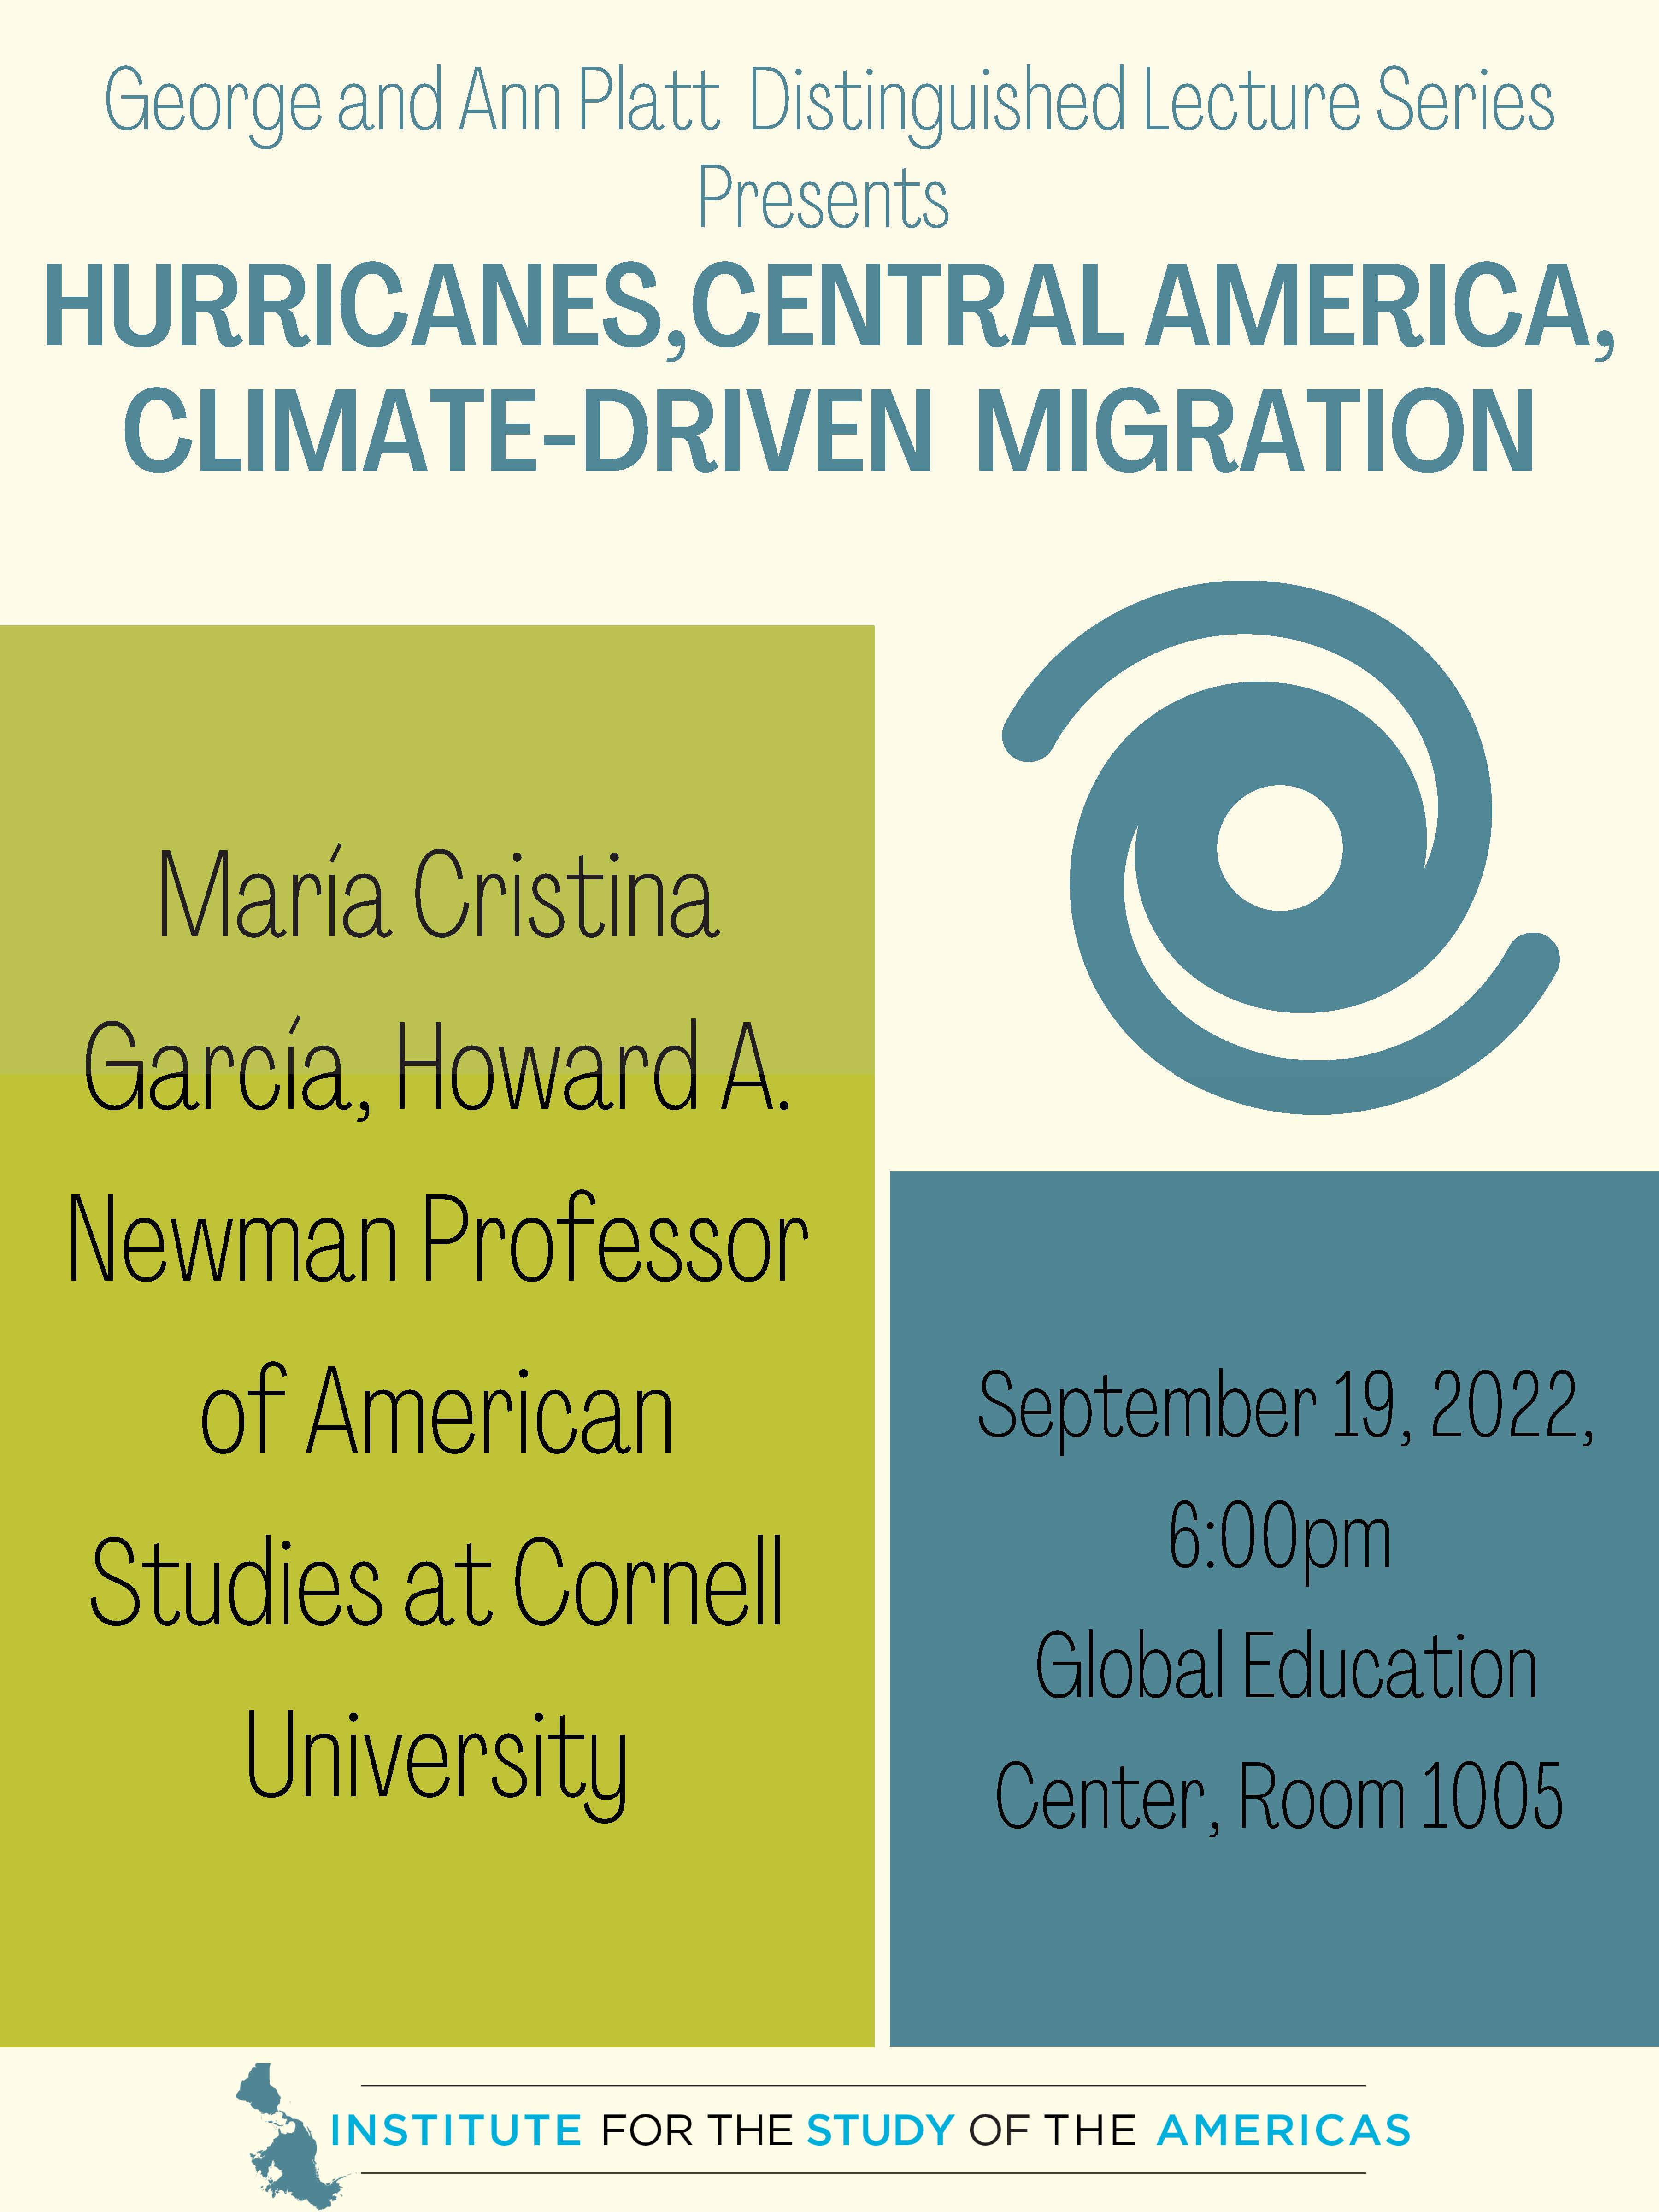 George and Ann Platt Lecture Series: Hurricanes, Central America, and Climate-driven Migration